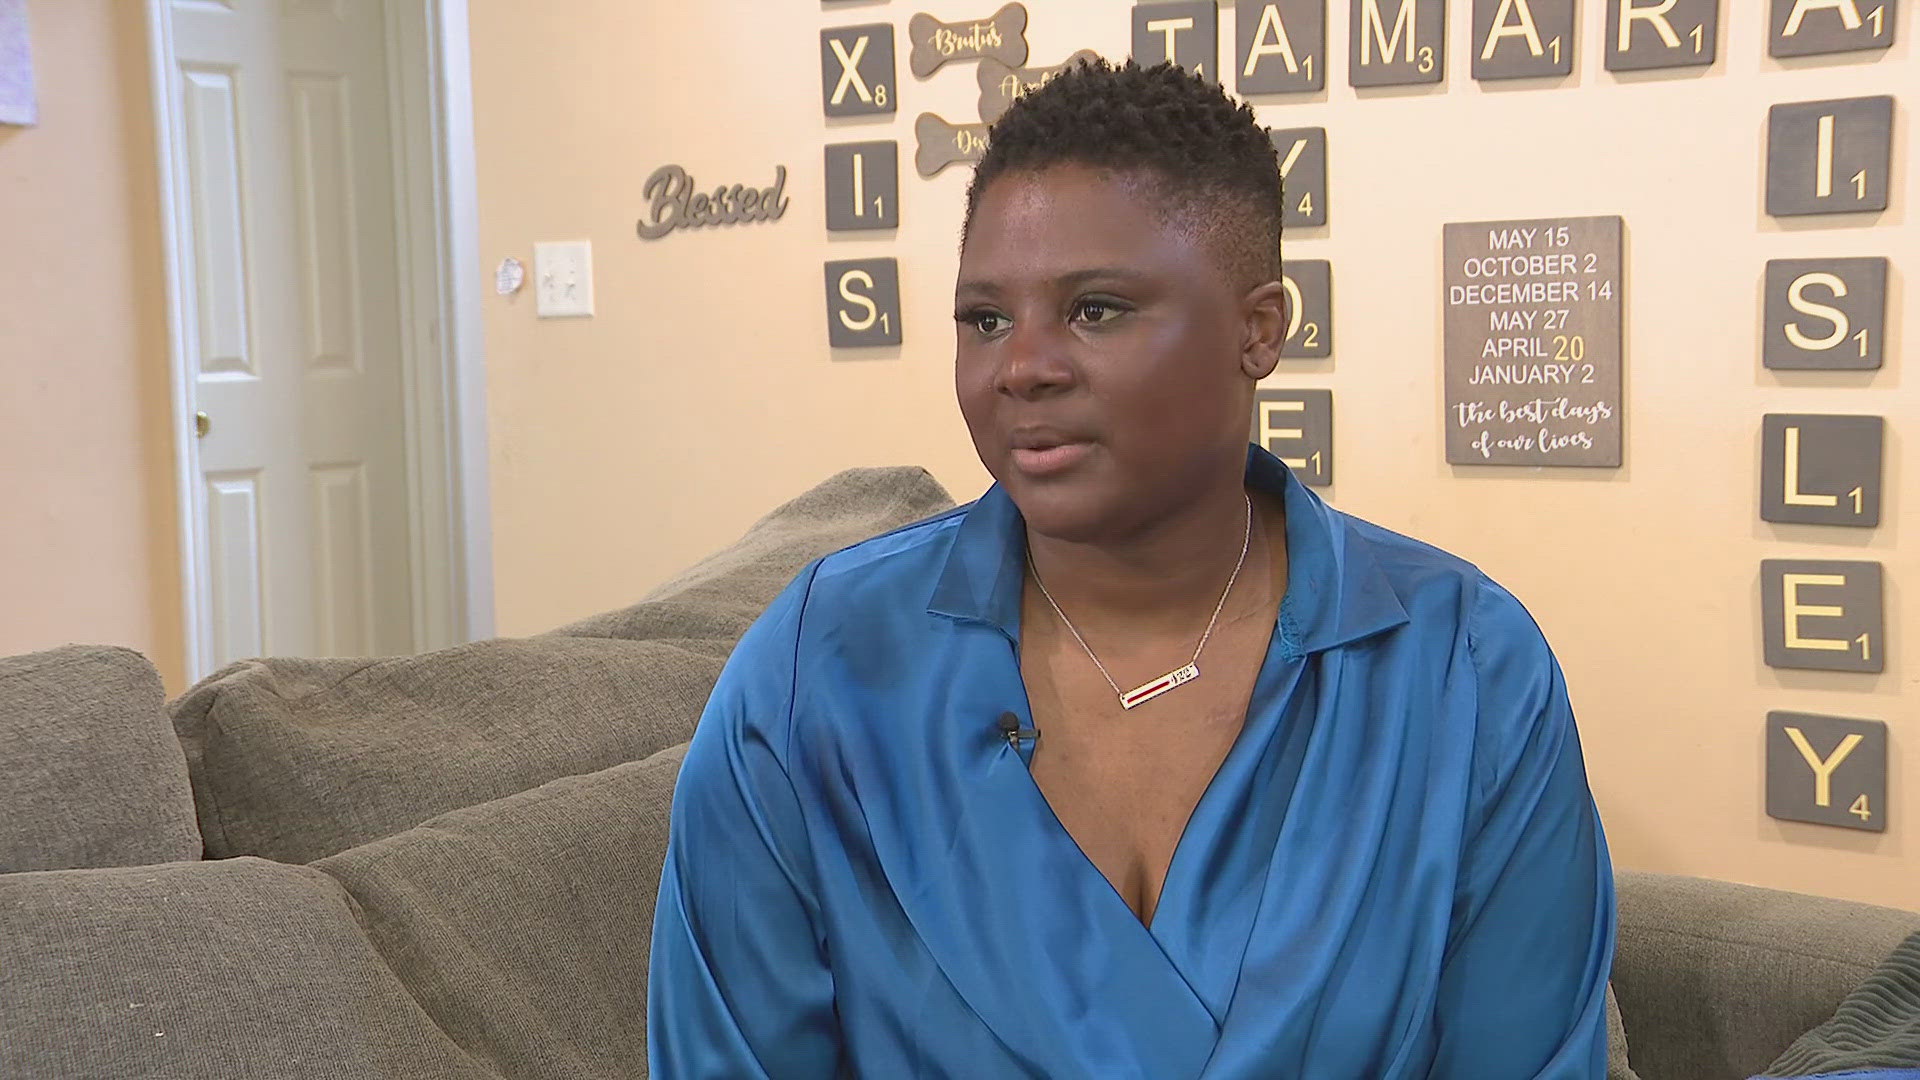 Alexis Bohannon, Officer Tamarris Bohannon's widow, opens up about what it was like to confront her husband's killer.